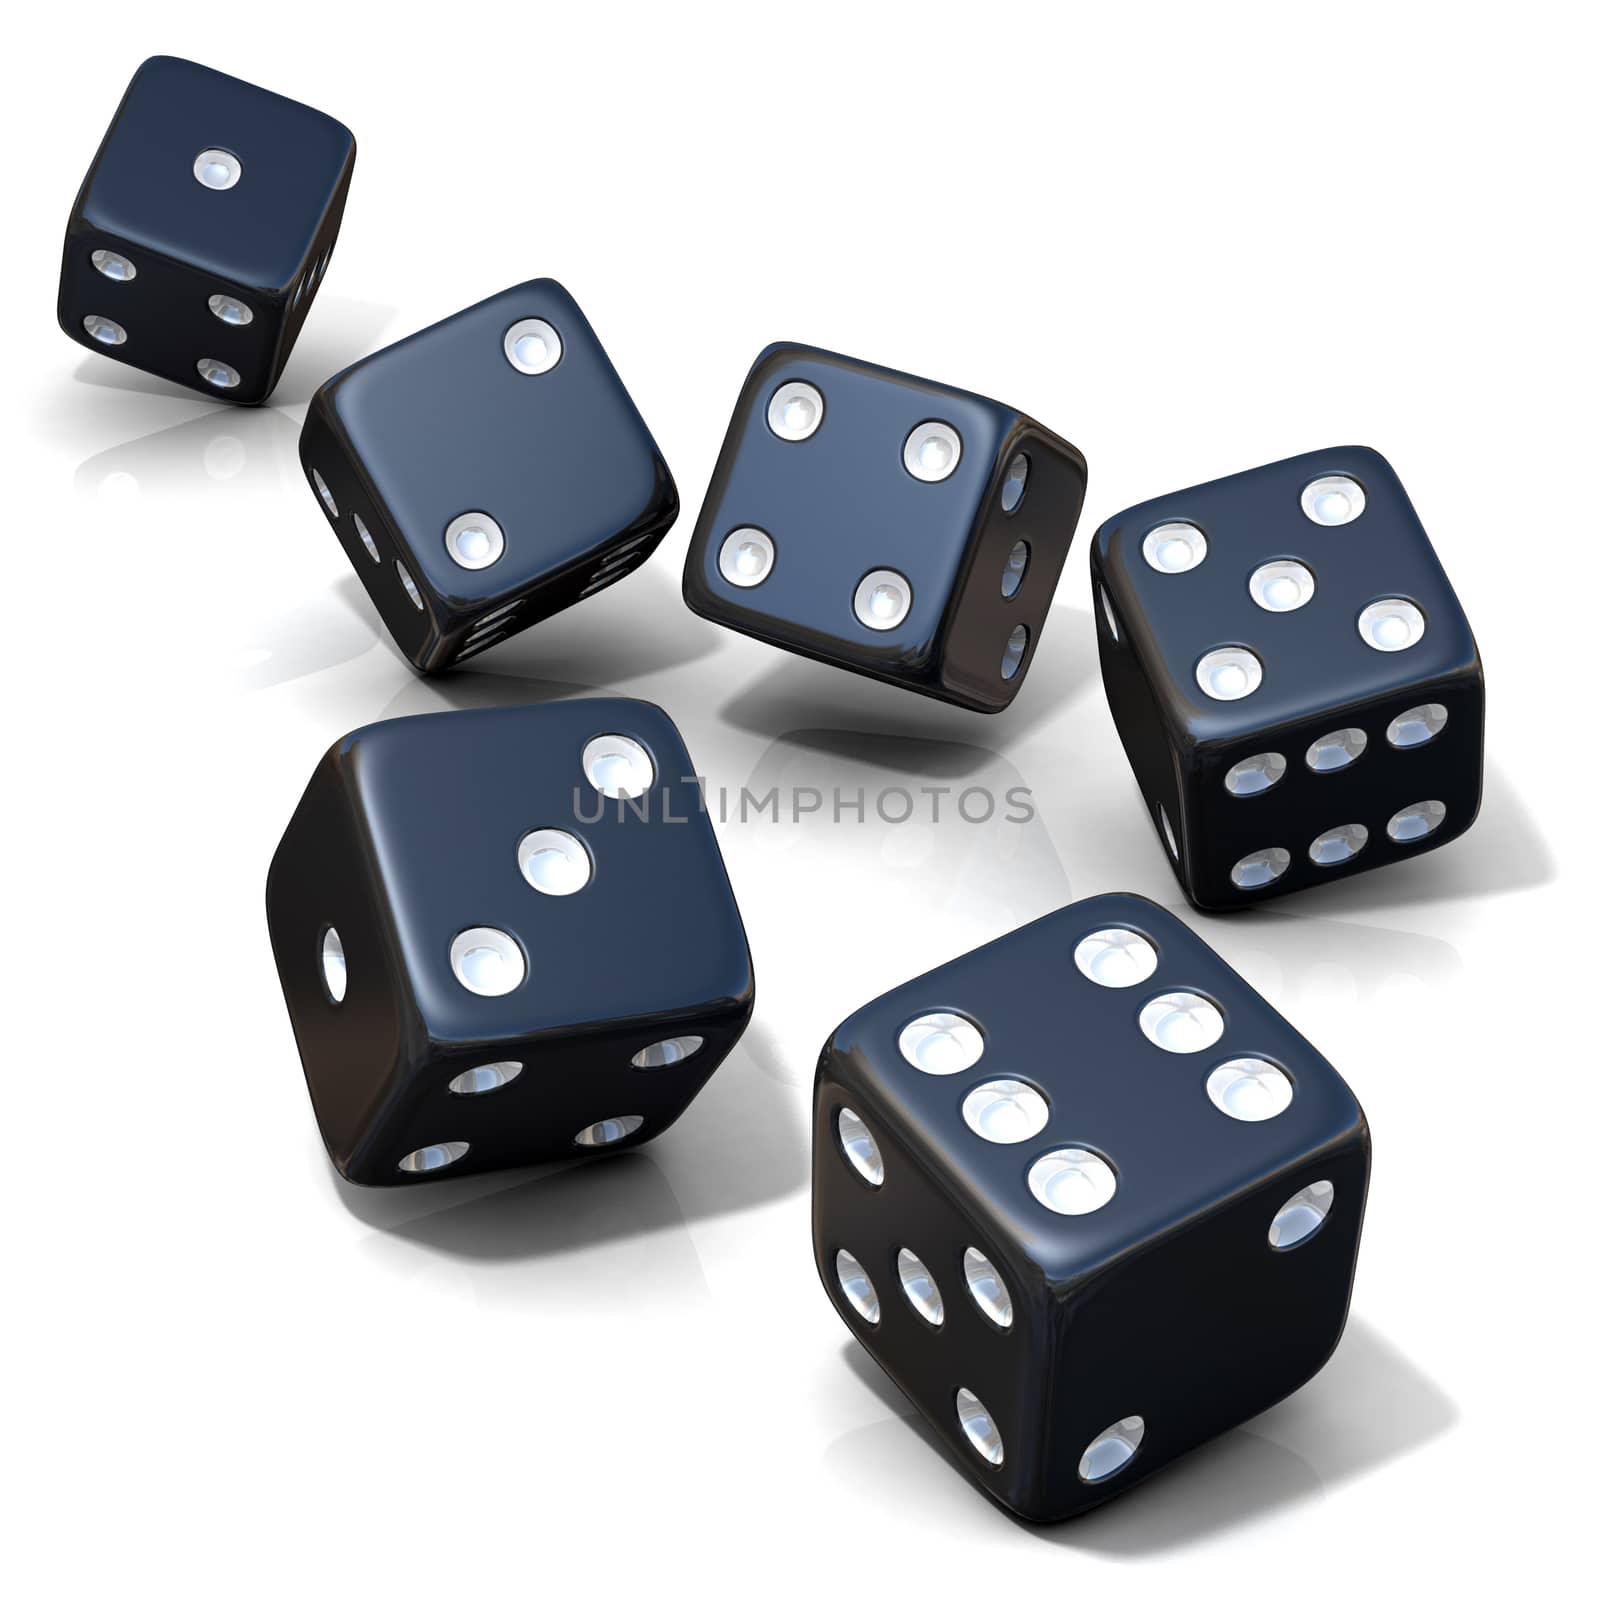 Six black game dices by djmilic